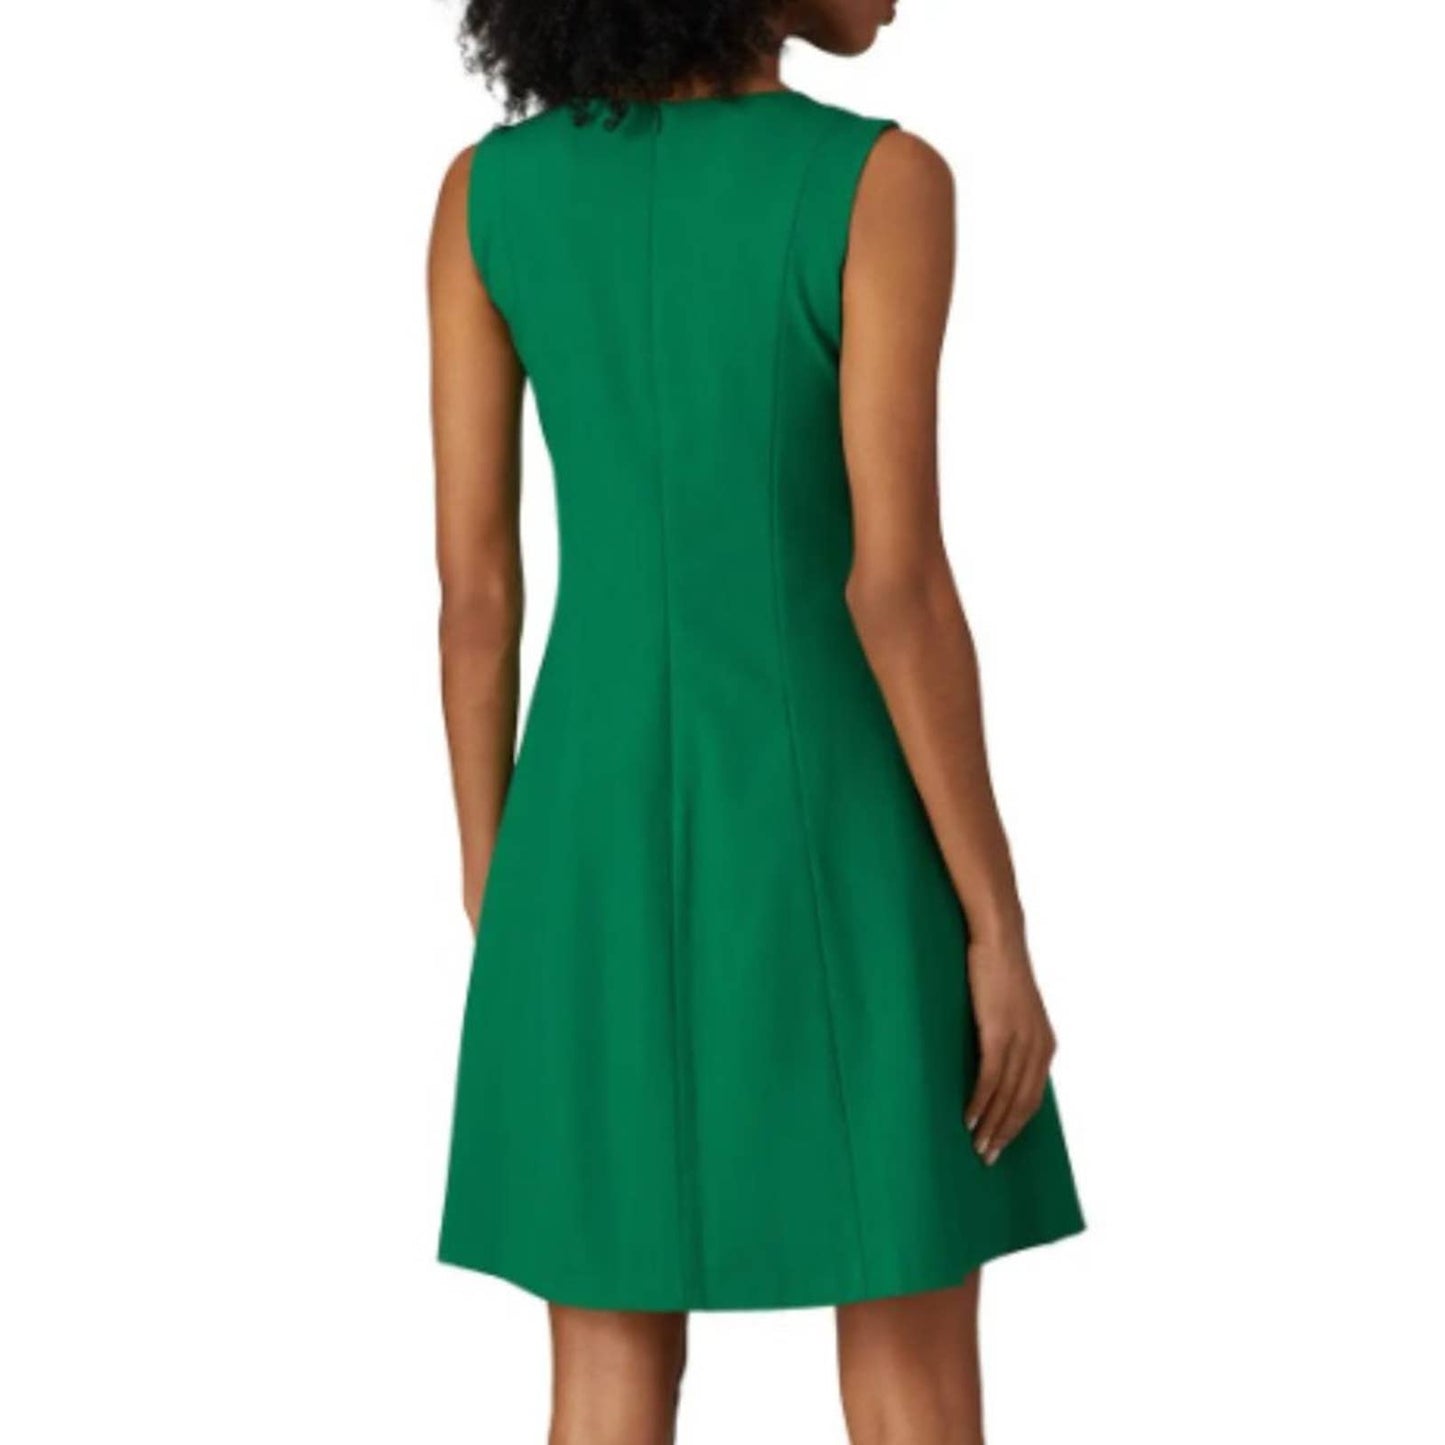 Of Mercer Green Juniper Fit and Flare Dress Size 6